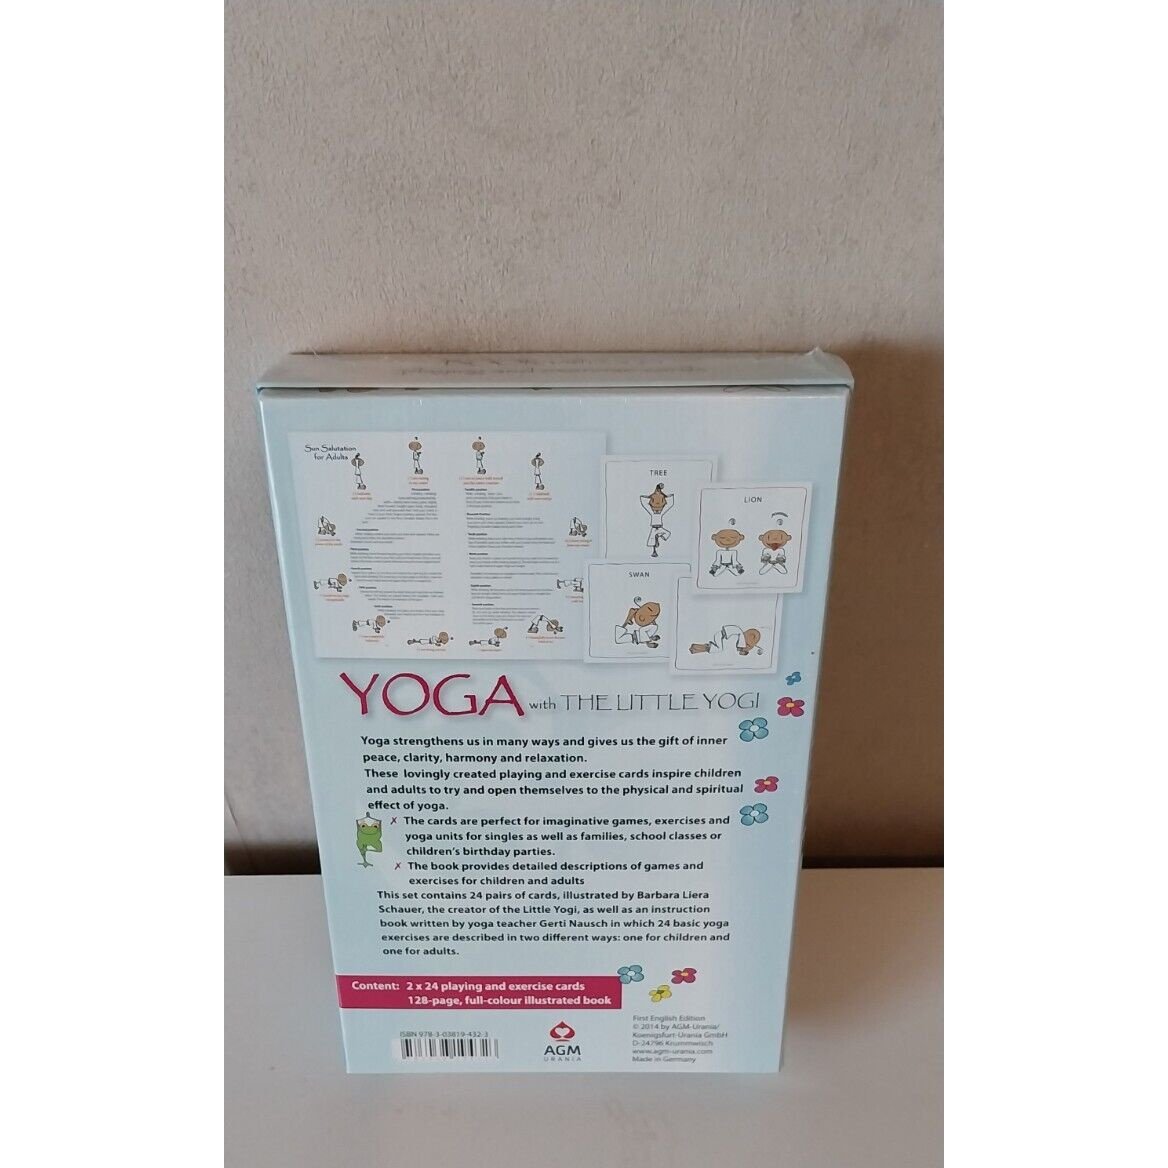 yoga with the little yogi for children and adults .Book + Cards